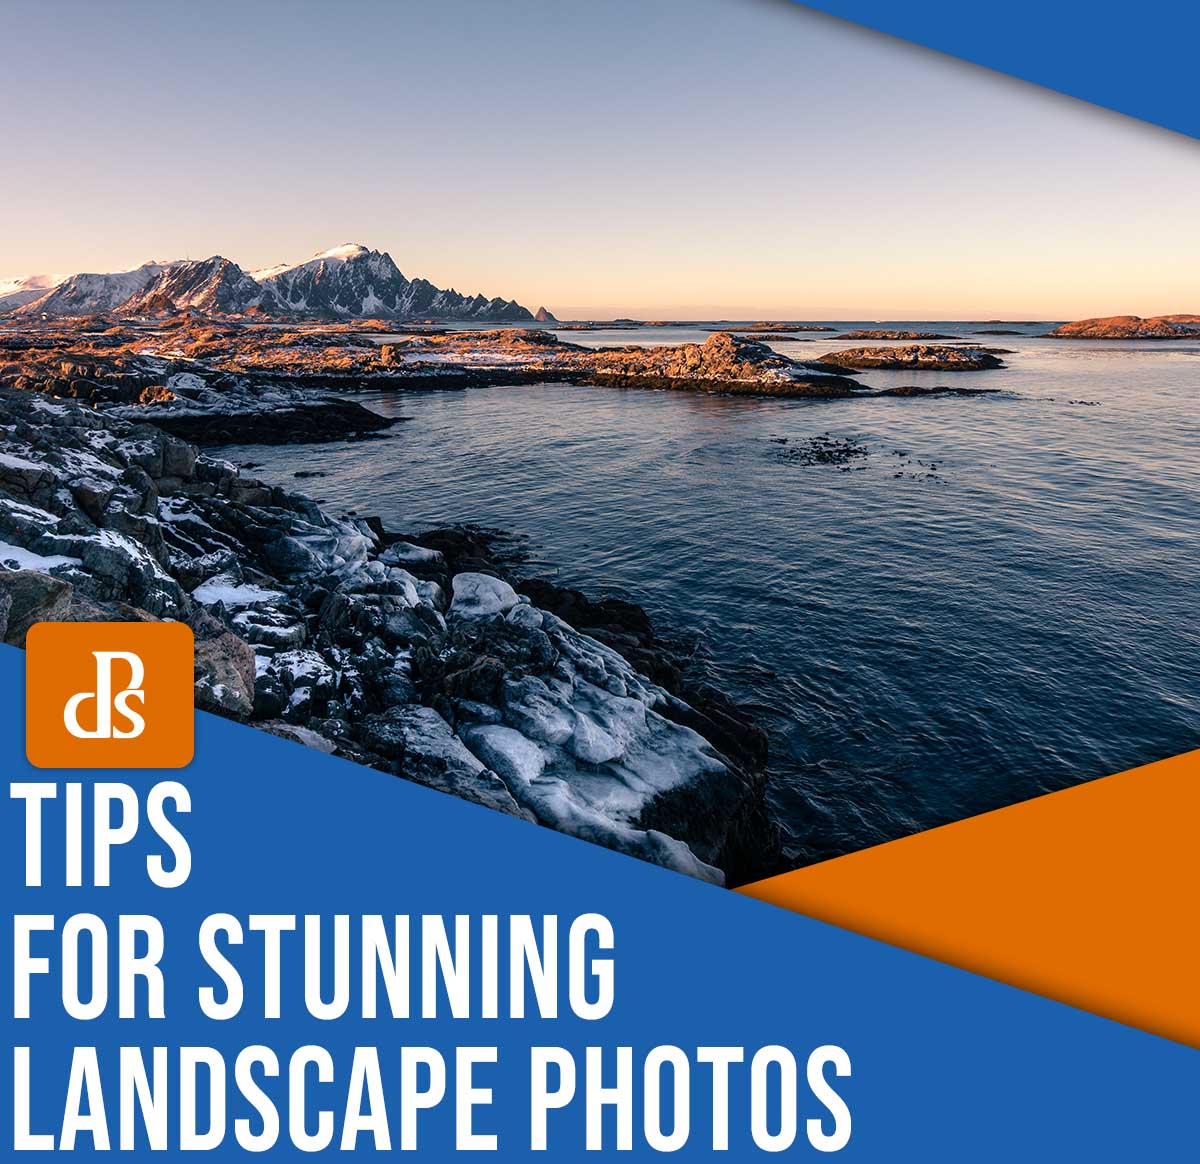 Tips for stunning landscape photos